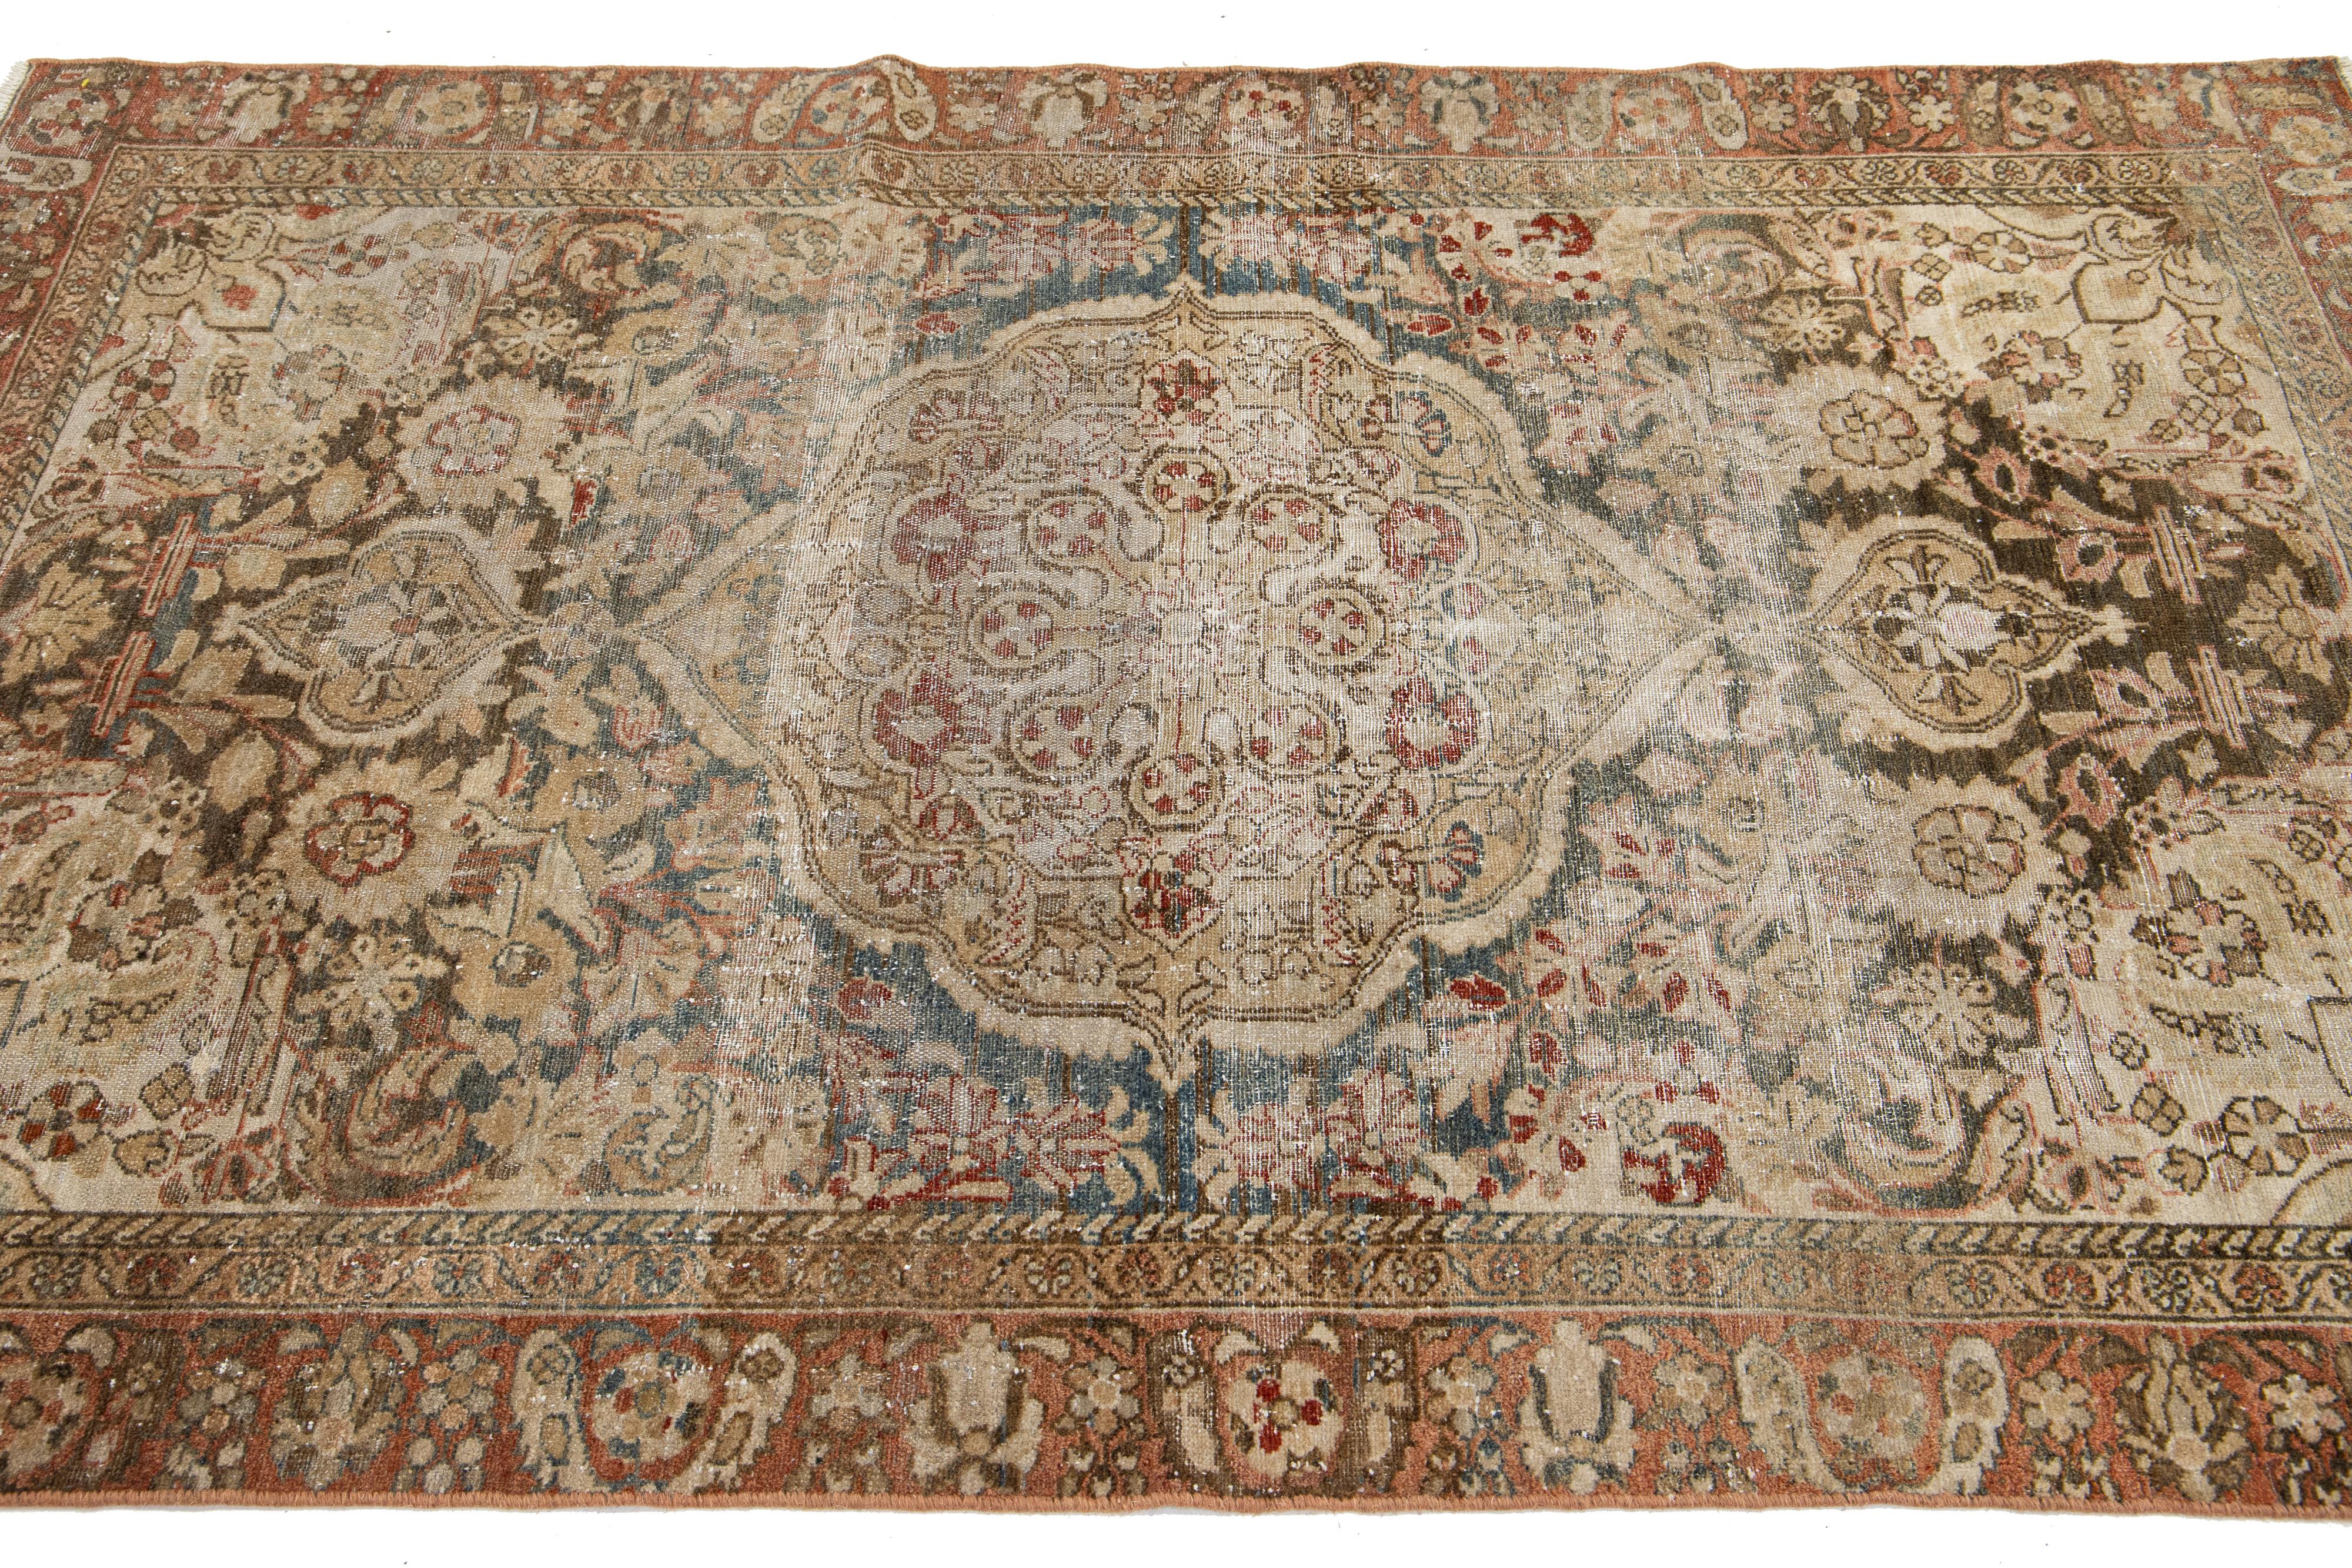 1900s Antique Persian Tabriz Handmade Wool Rug with Medallion Motif In Excellent Condition For Sale In Norwalk, CT